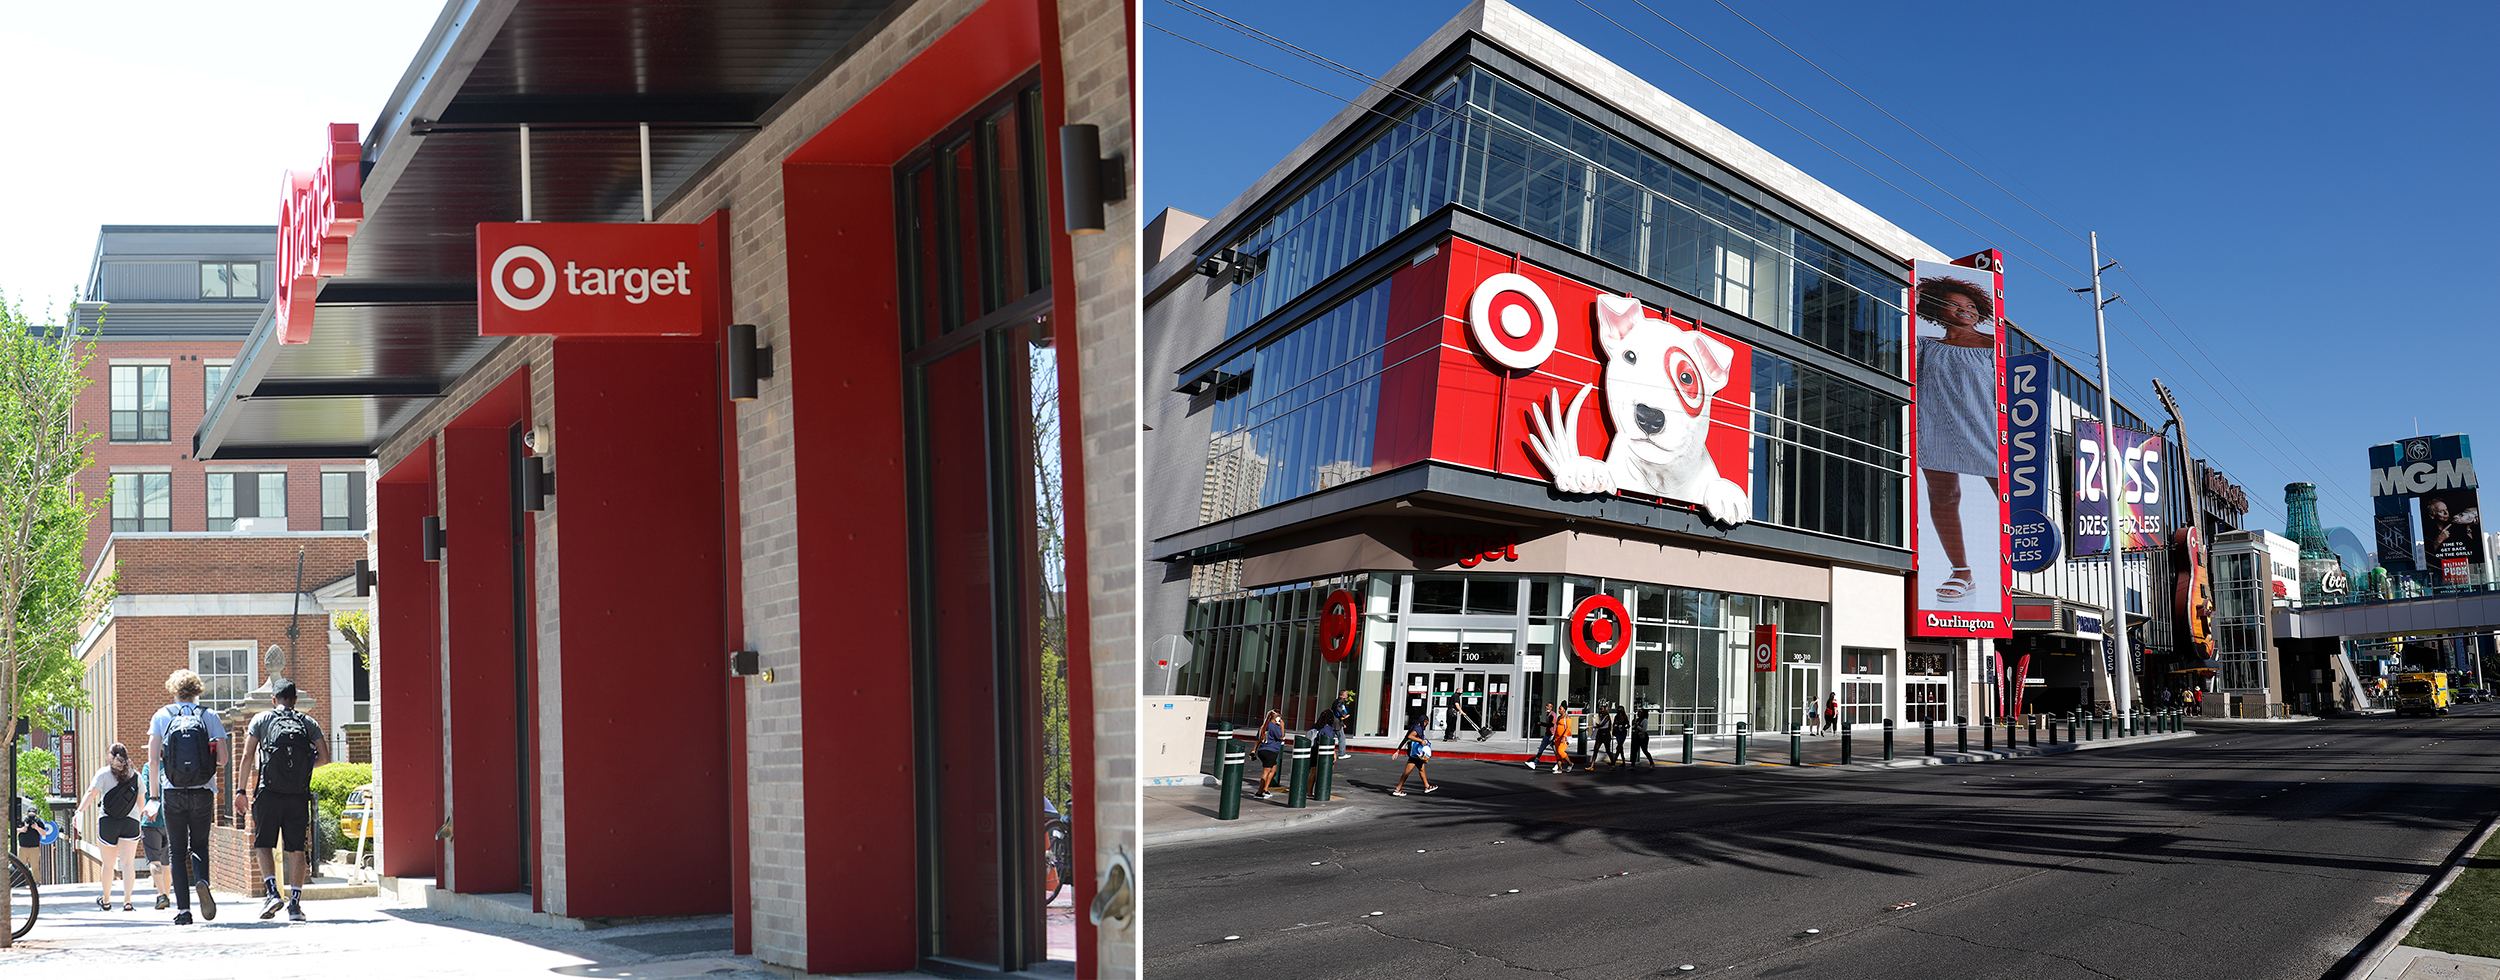 During the pandemic, Target opened a variety of formats, ranging from big box to smaller stores near university campuses.